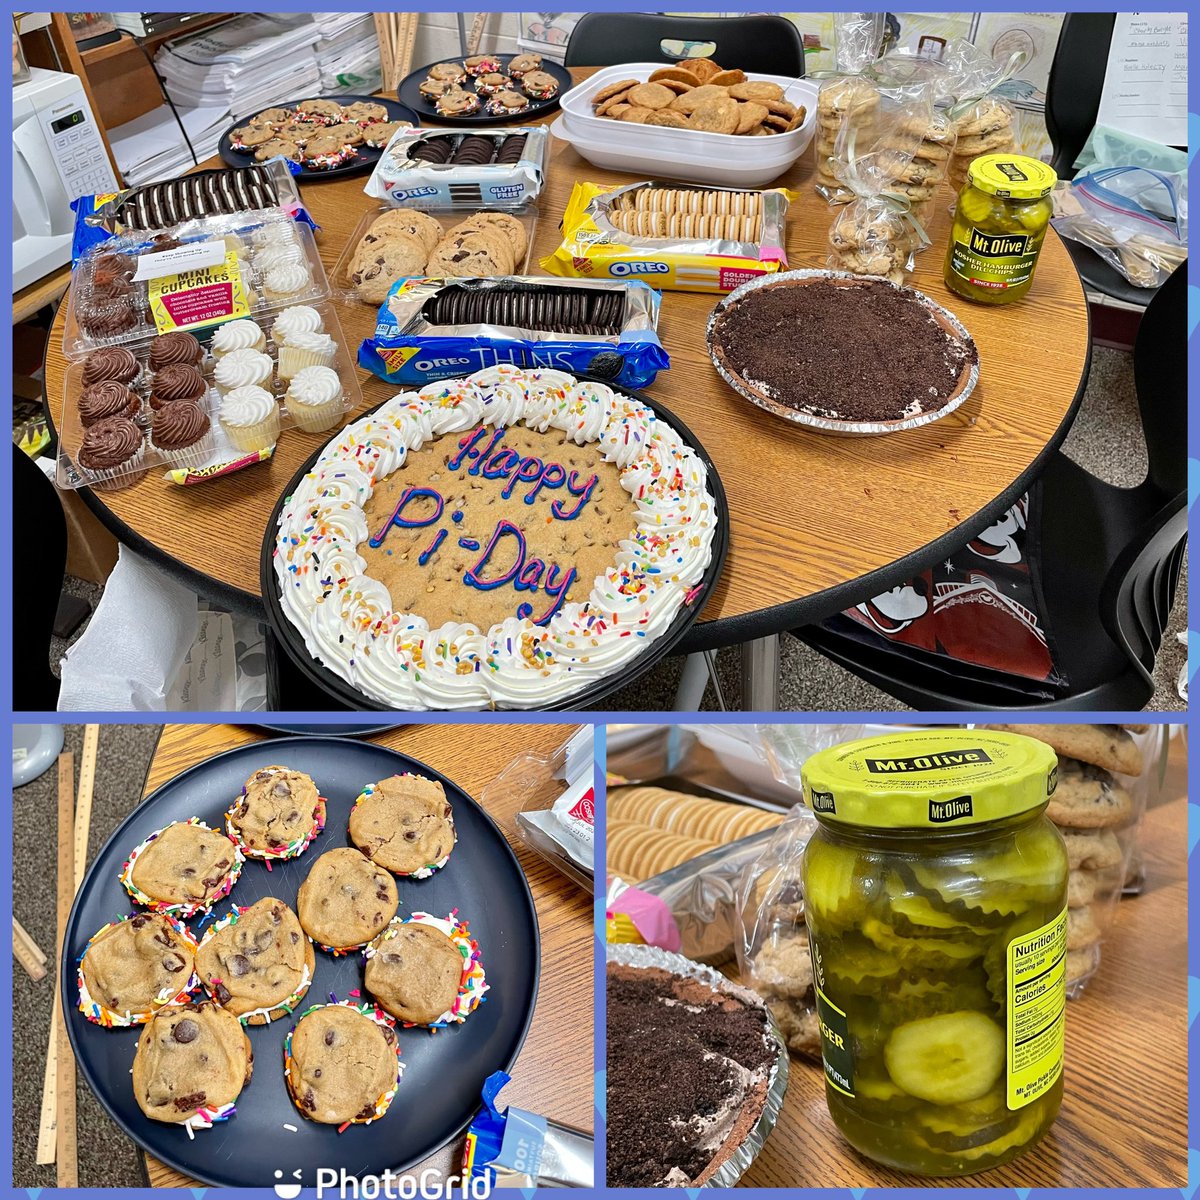 So many circular yummies throughout the day. The students were so creative this year to celebrate Pi Day. Thank you to all the parents and families who helped us celebrate this fun math “holiday!” #PiDay @LibertyvilleD70 @HighlandD70 #d70shinyapple #Math